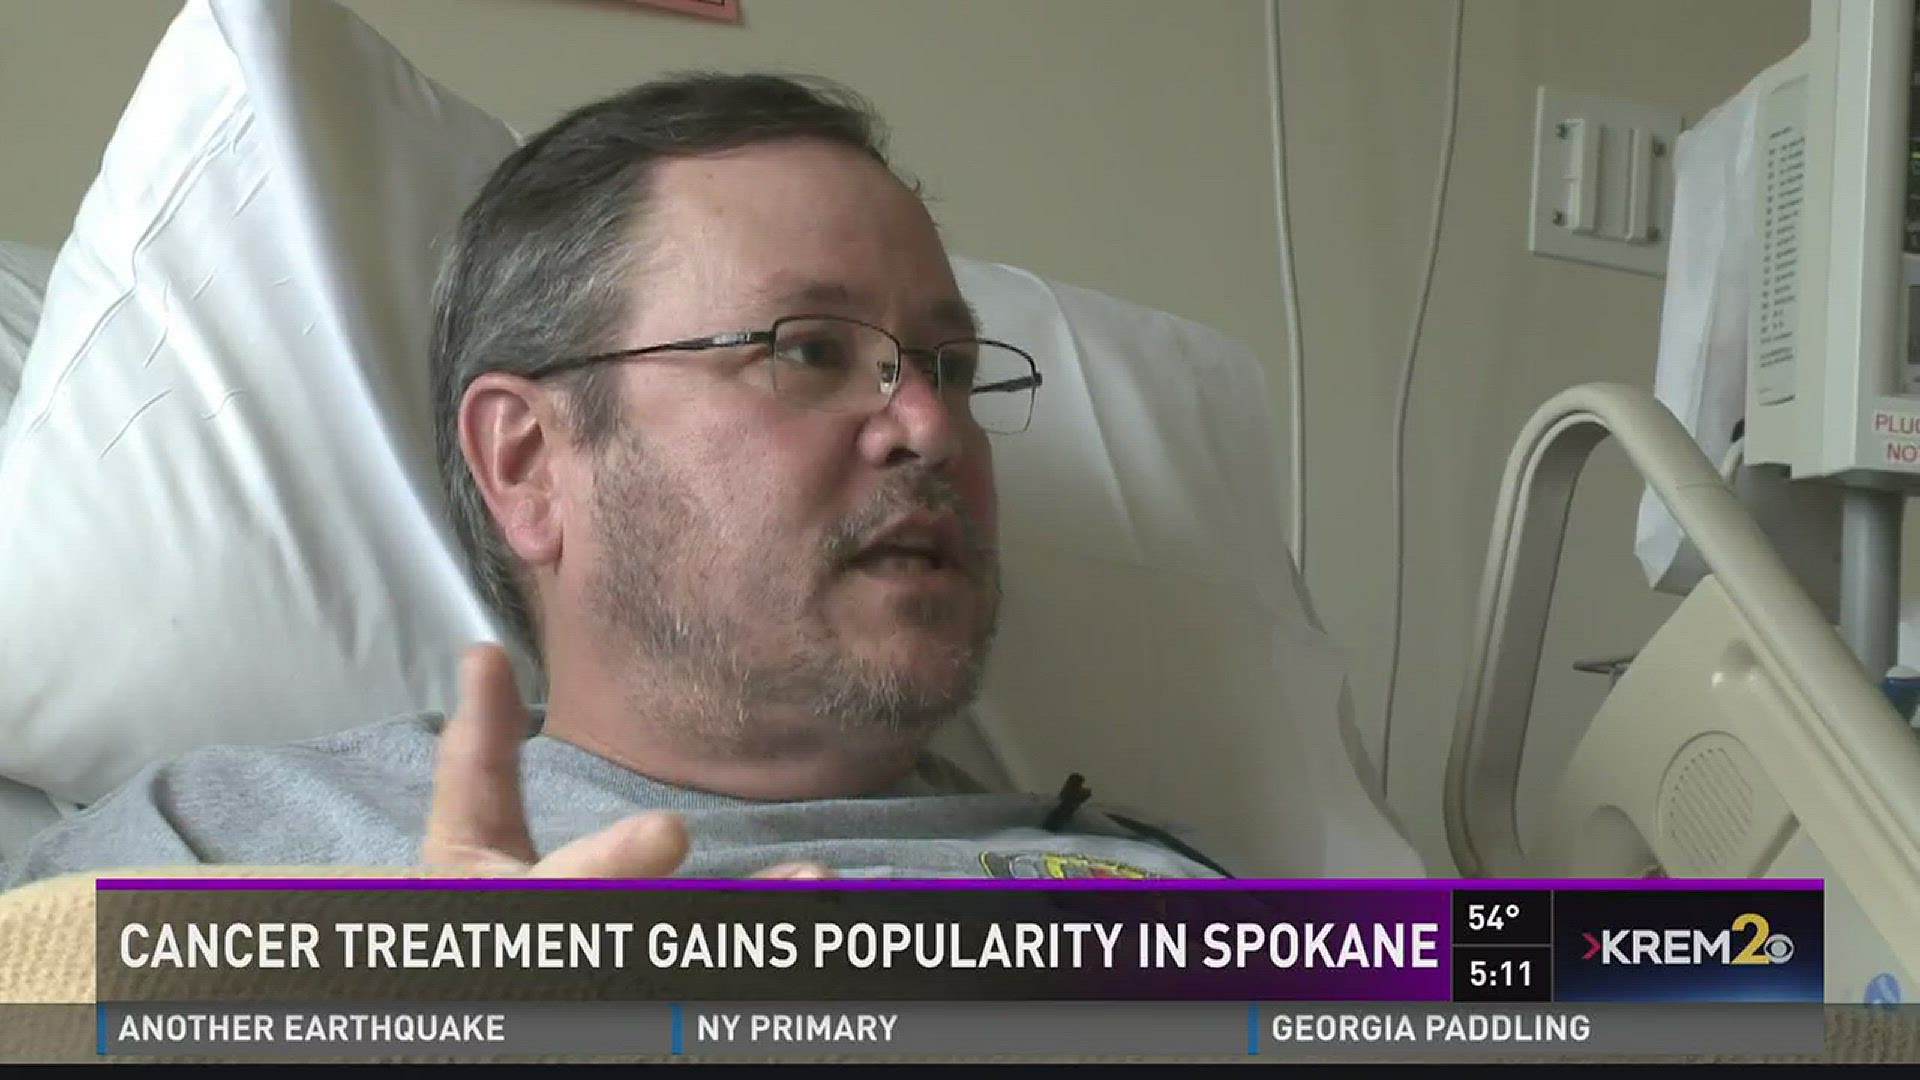 Cancer treatment gains popularity in Spokane